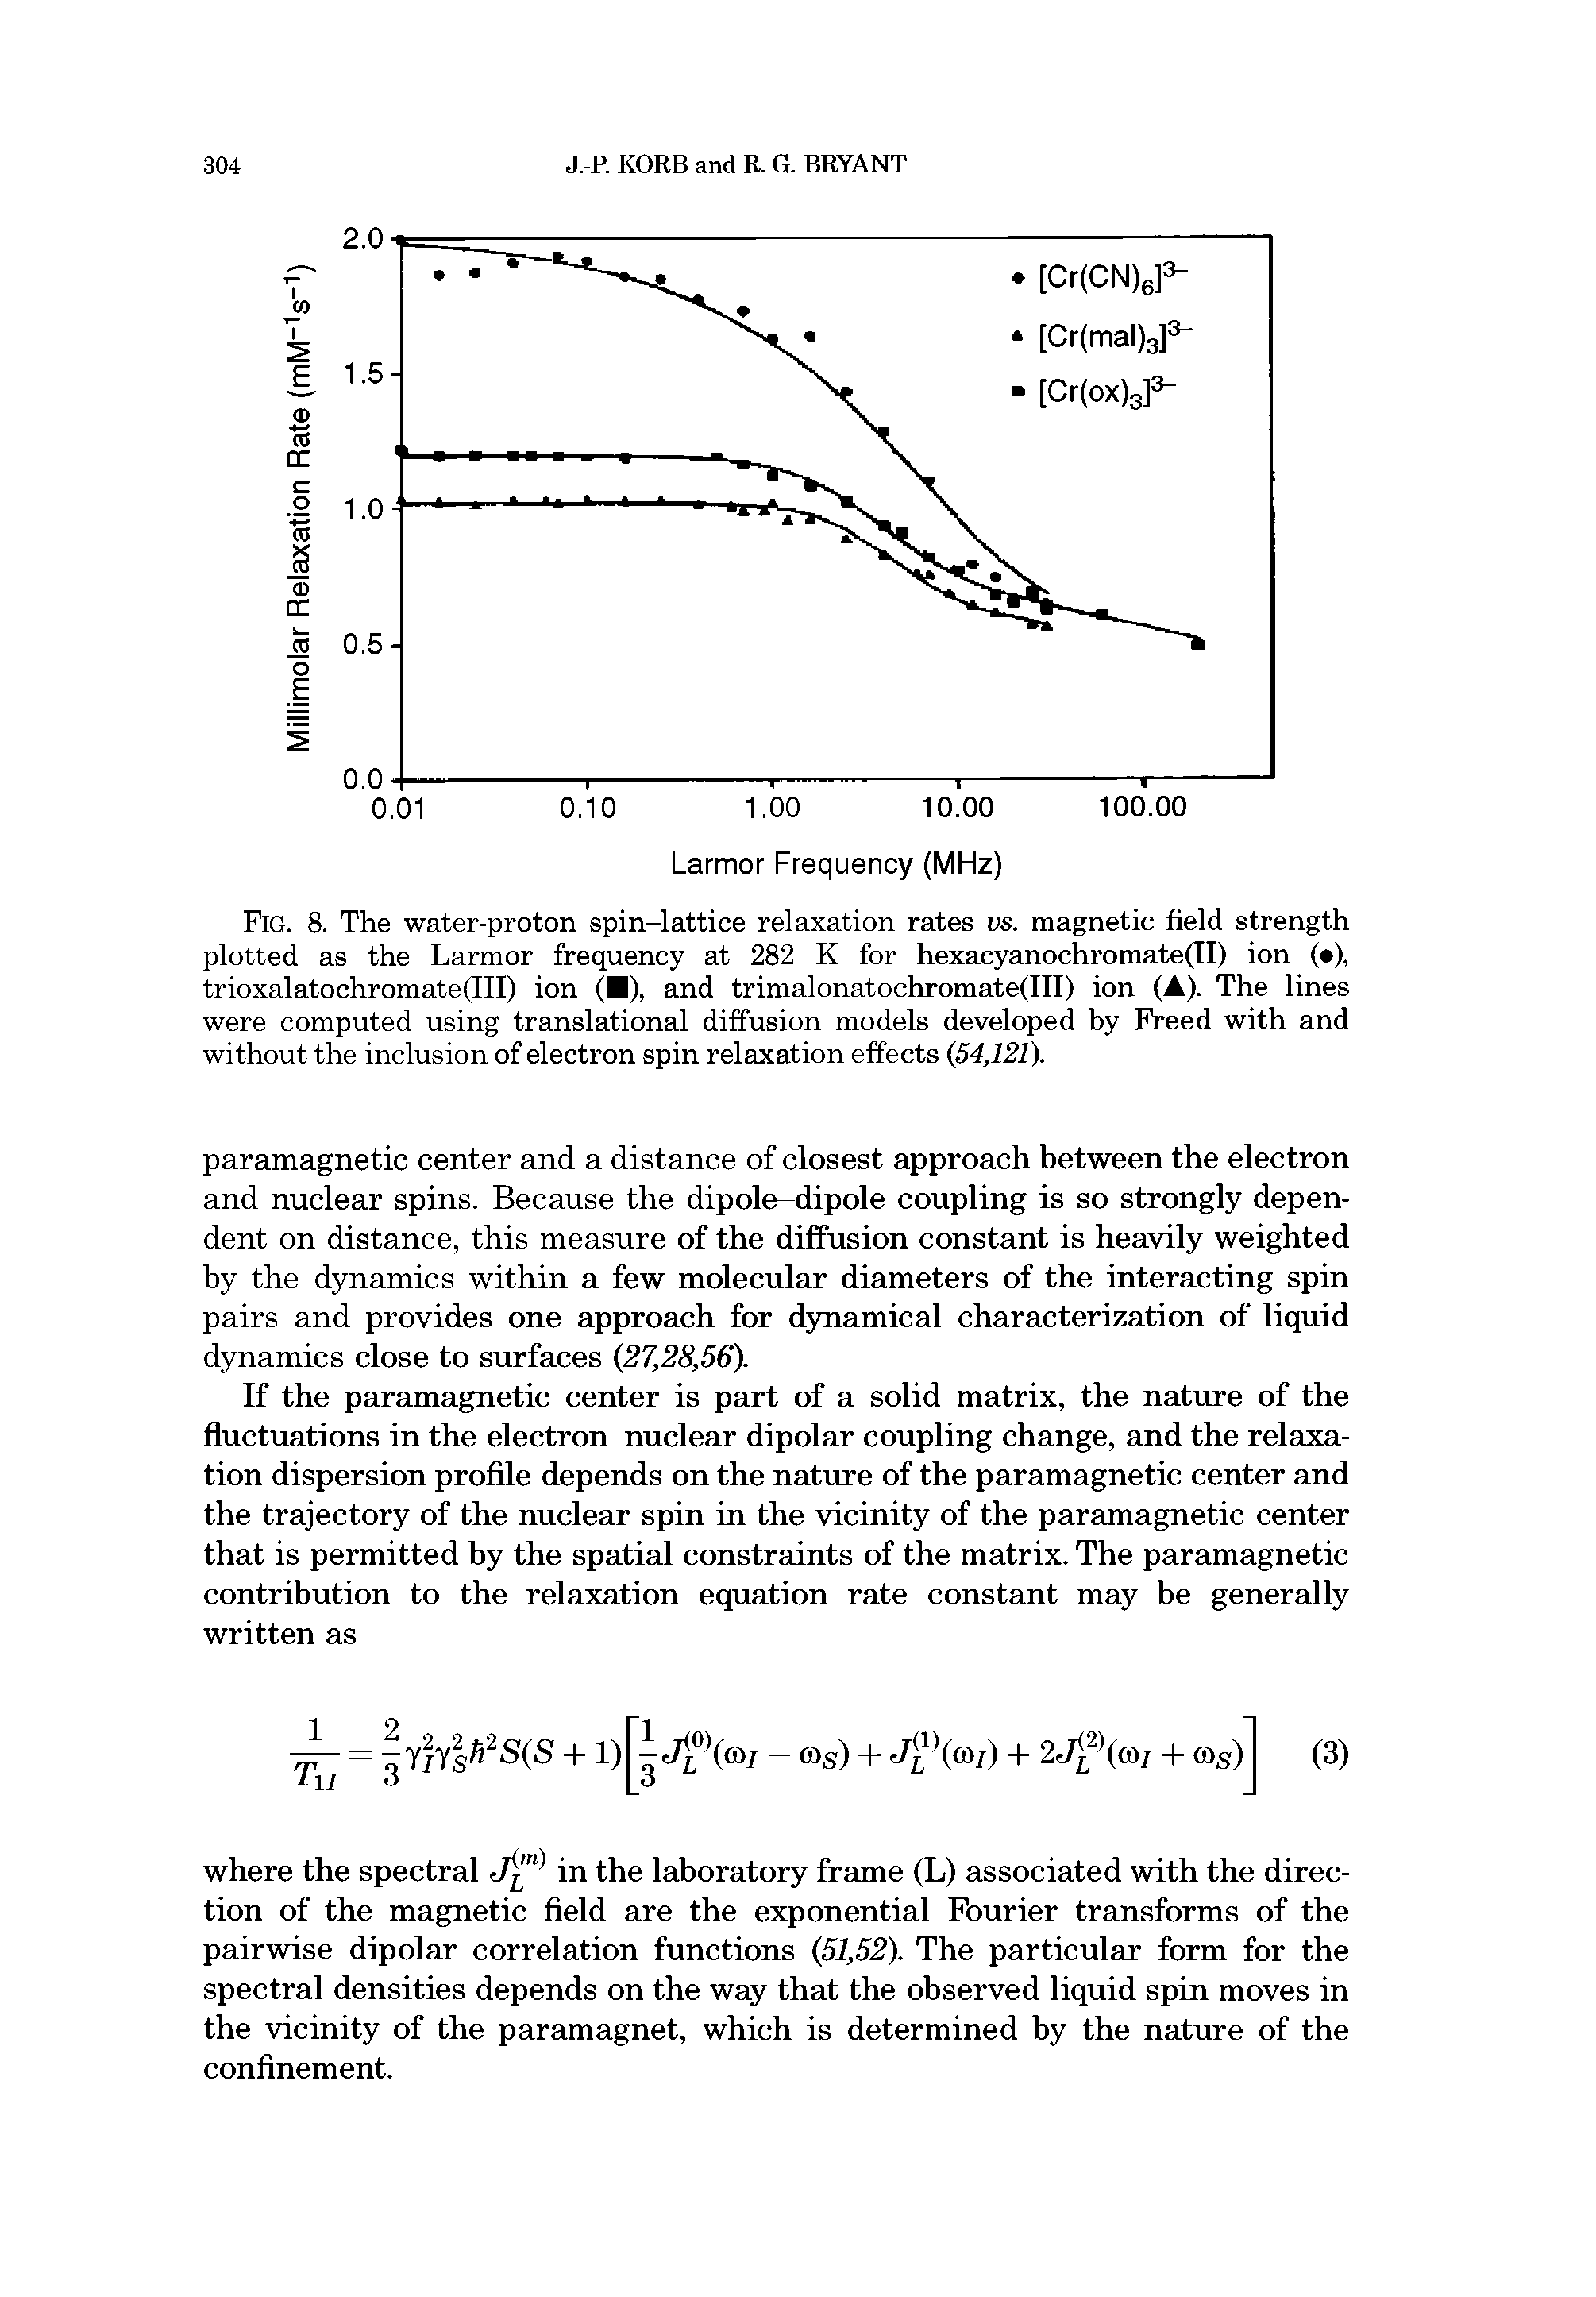 Fig. 8. The water-proton spin-lattice relaxation rates vs. magnetic field strength plotted as the Larmor frequency at 282 K for hexacyanochromate(II) ion ( ), trioxalatochromate(III) ion ( ), and trimalonatochromate(III) ion (A). The lines were computed using translational diffusion models developed by Freed with and without the inclusion of electron spin relaxation effects 54,121).